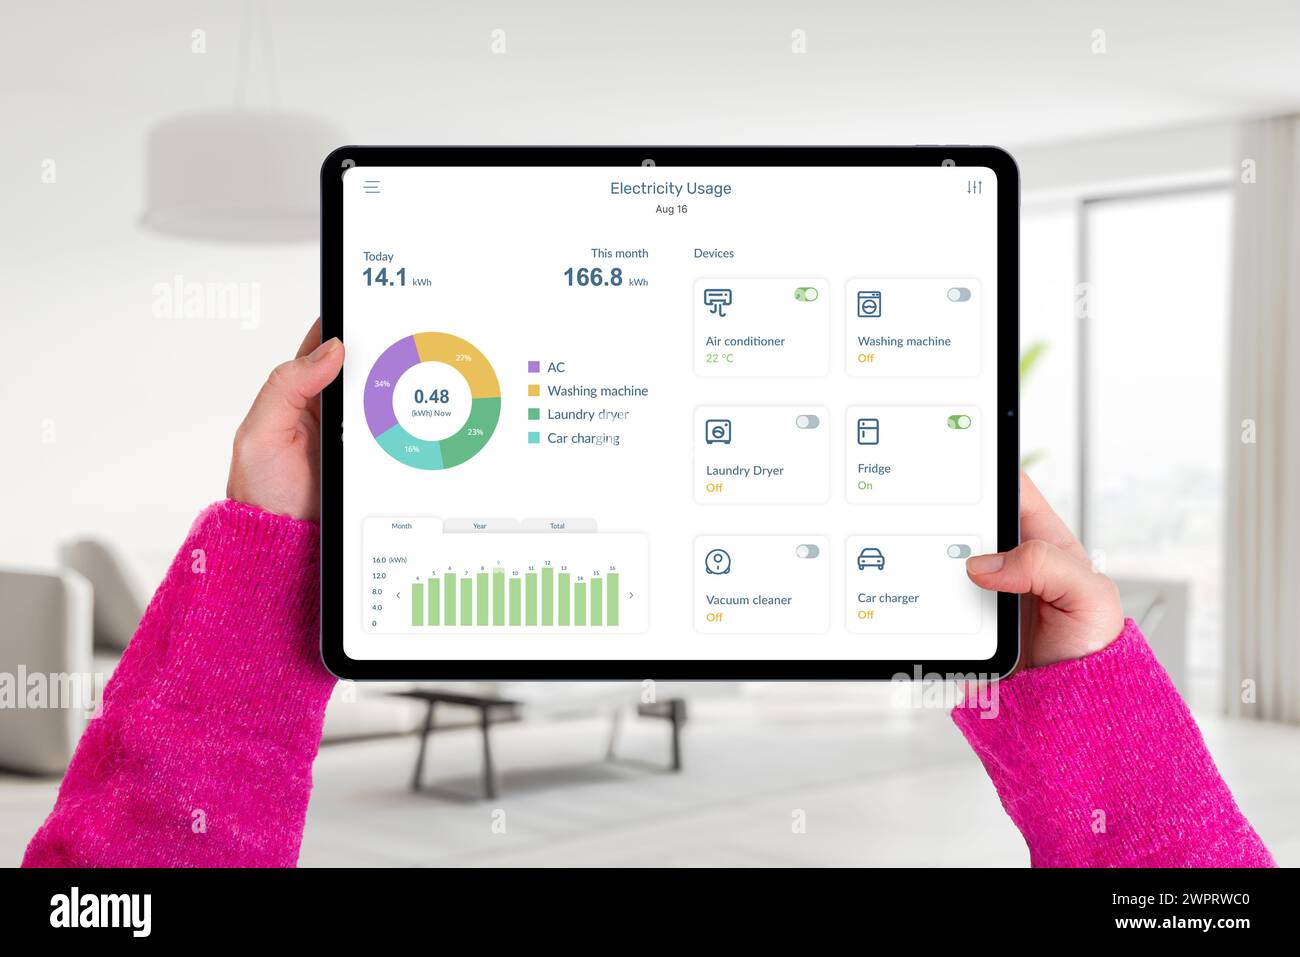 Hands hold tablet in living room with electricity usage app, monitoring consumption and controlling home devices. Concept of smart energy management Stock Photo